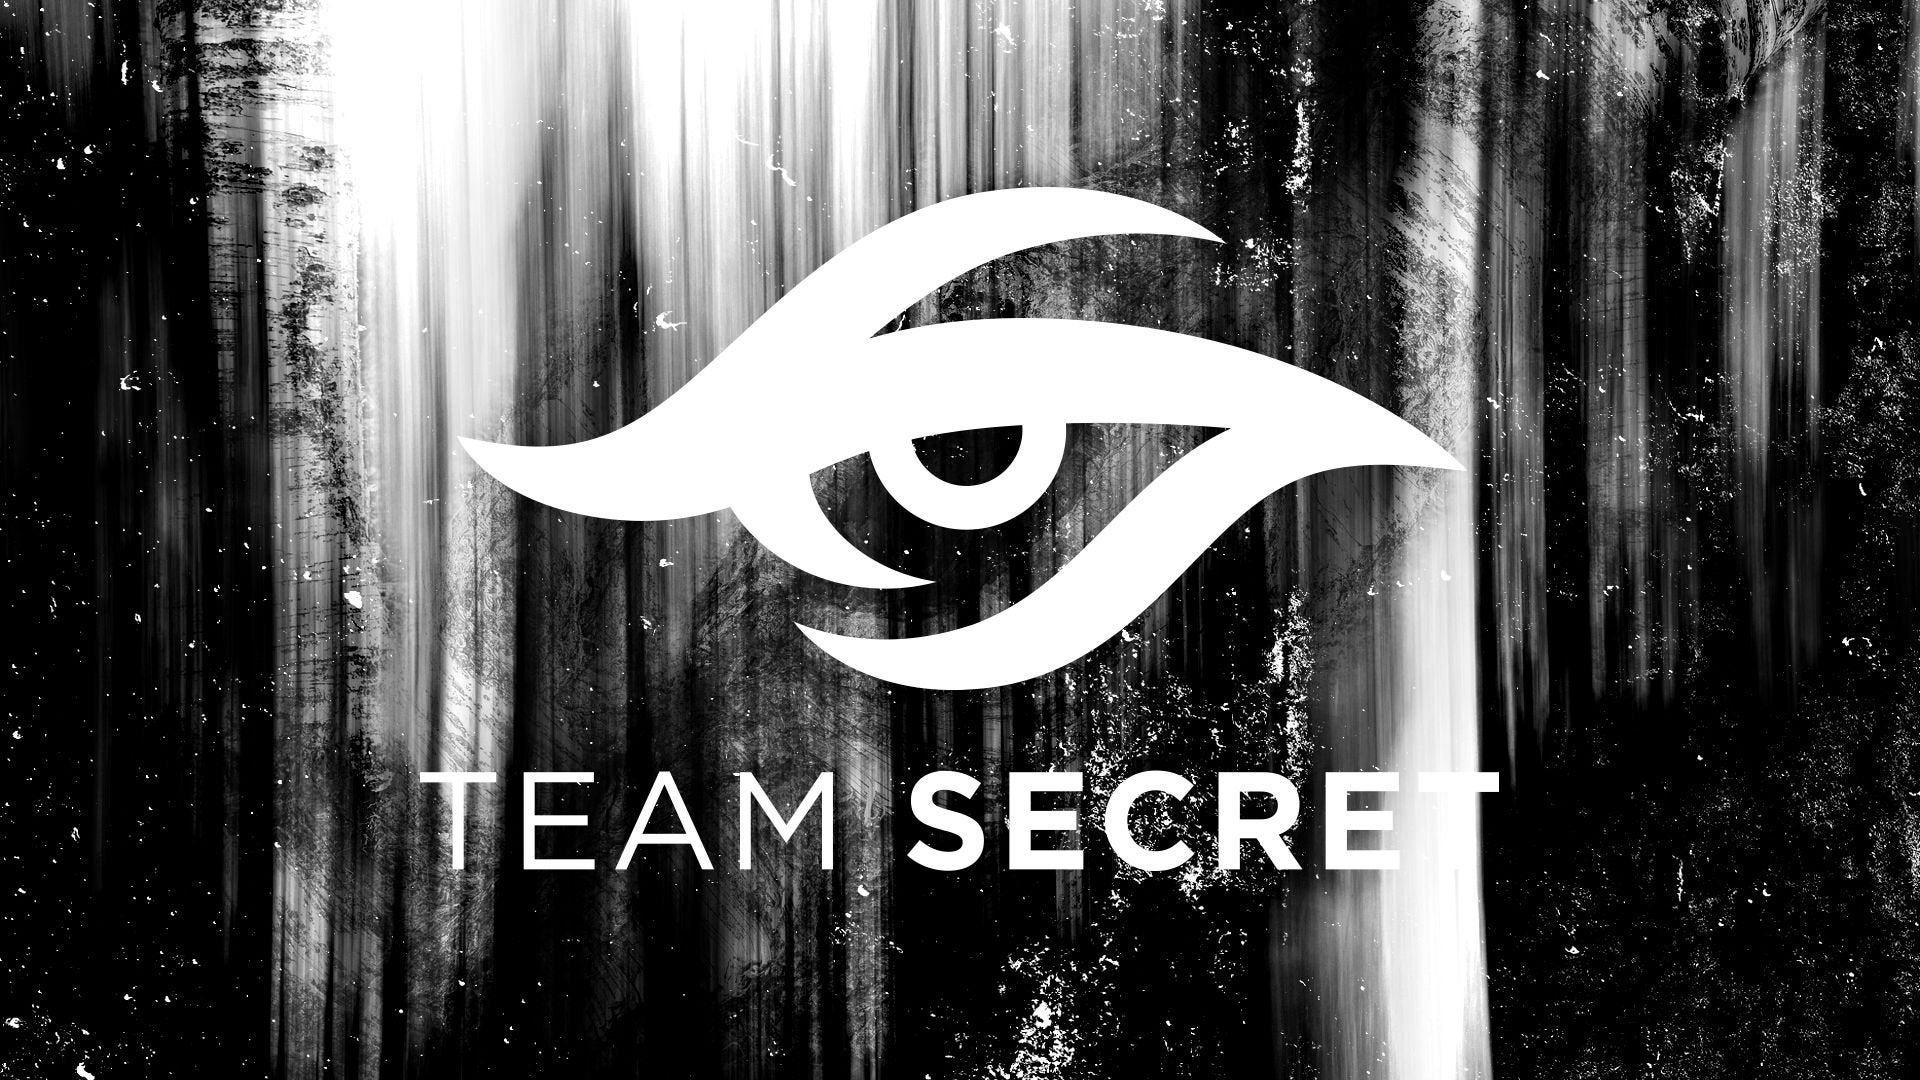 Later today team secret will officially unveil their new logo